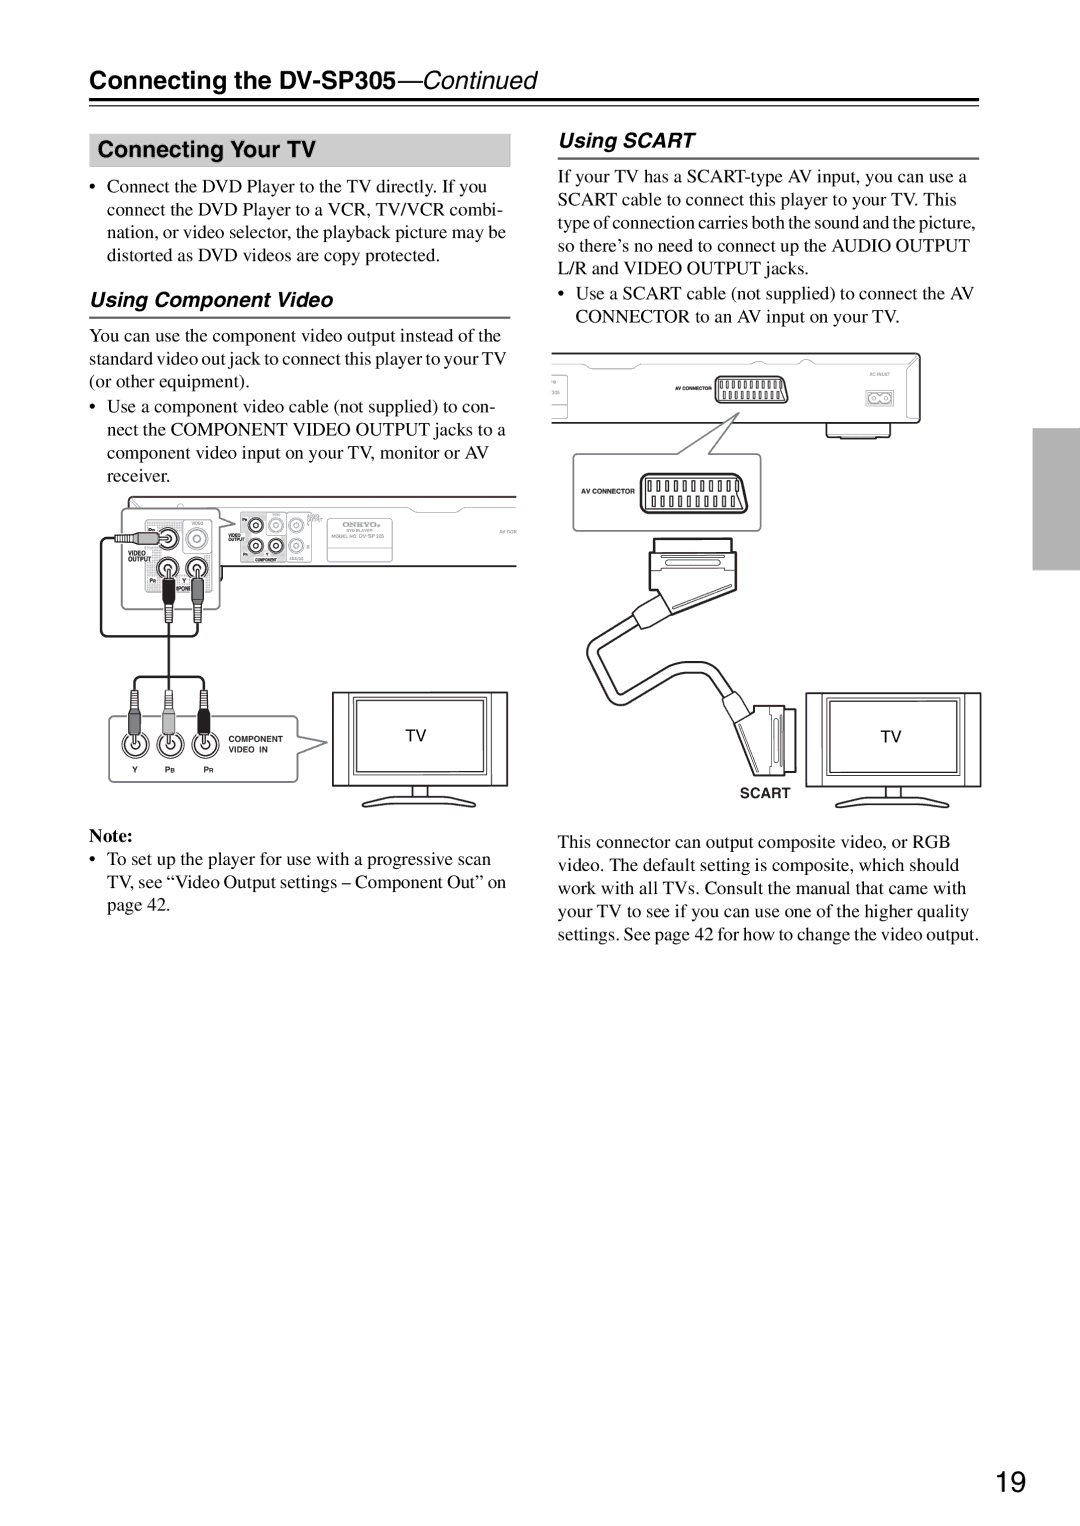 Onkyo DV-SP305 instruction manual Connecting Your TV, Using Component Video, Using Scart 